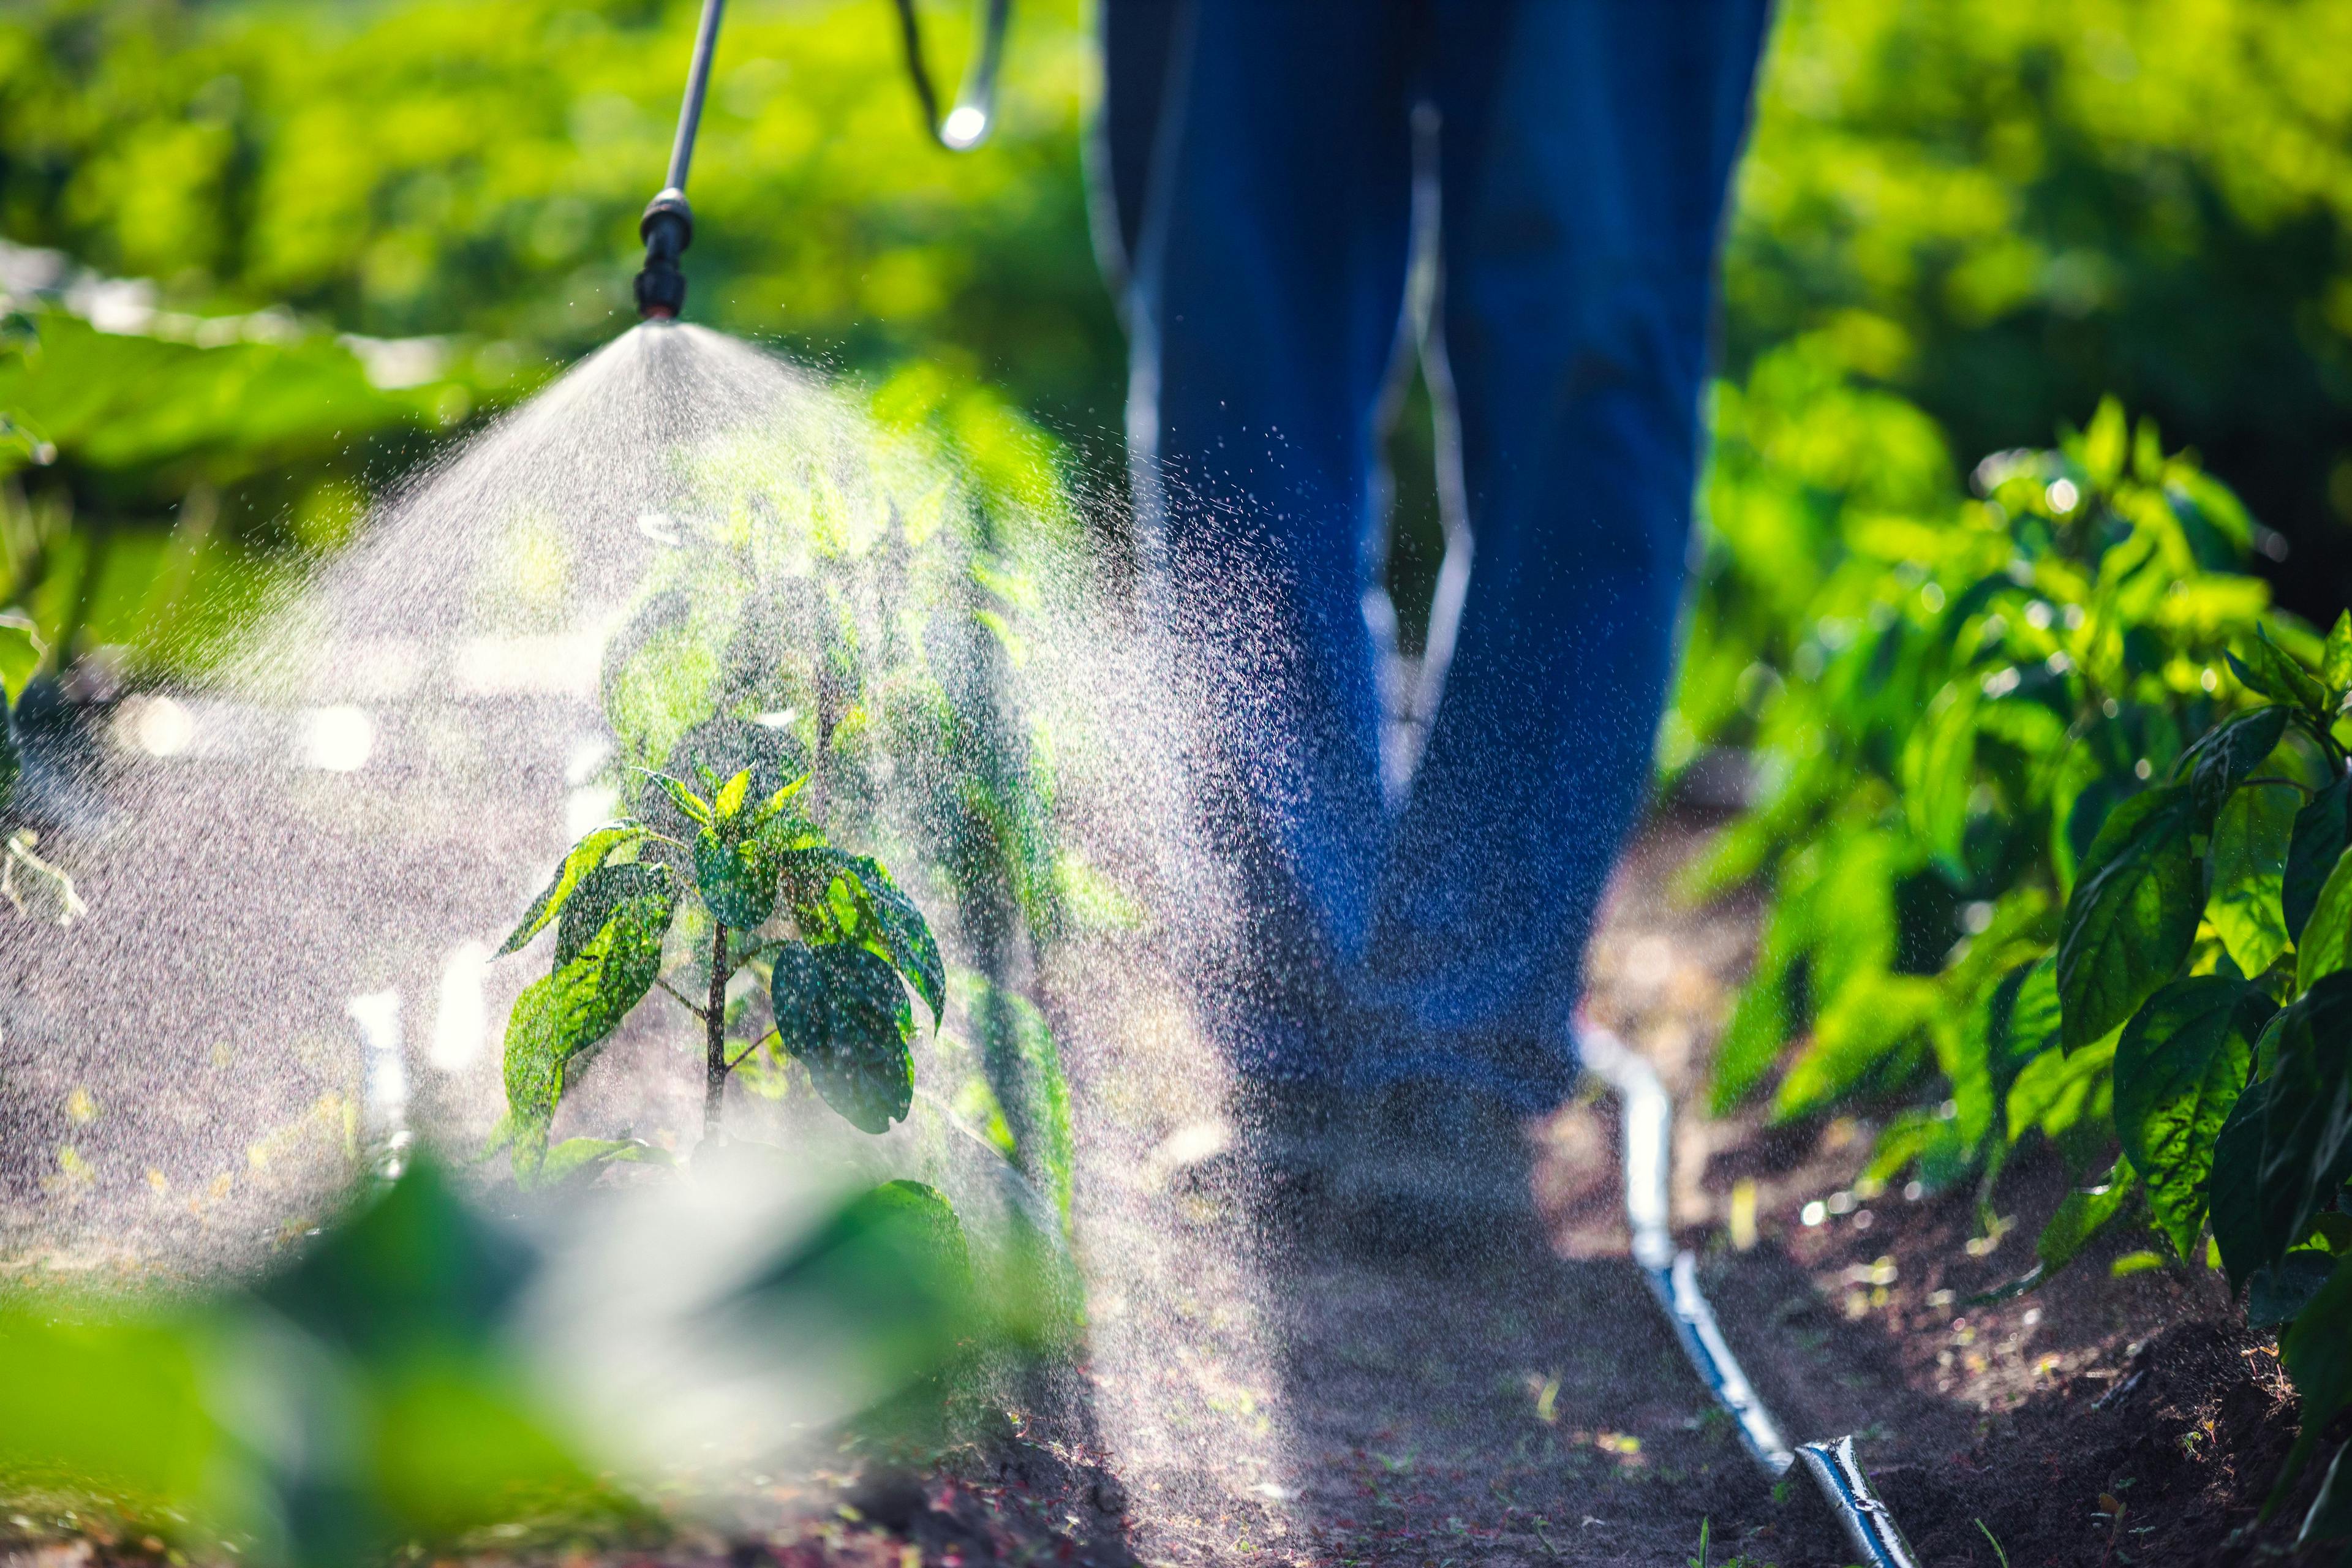 Farmer spraying vegetable green plants in the garden with herbicides, pesticides or insecticides. | Image Credit: © ValentinValkov - stock.adobe.com